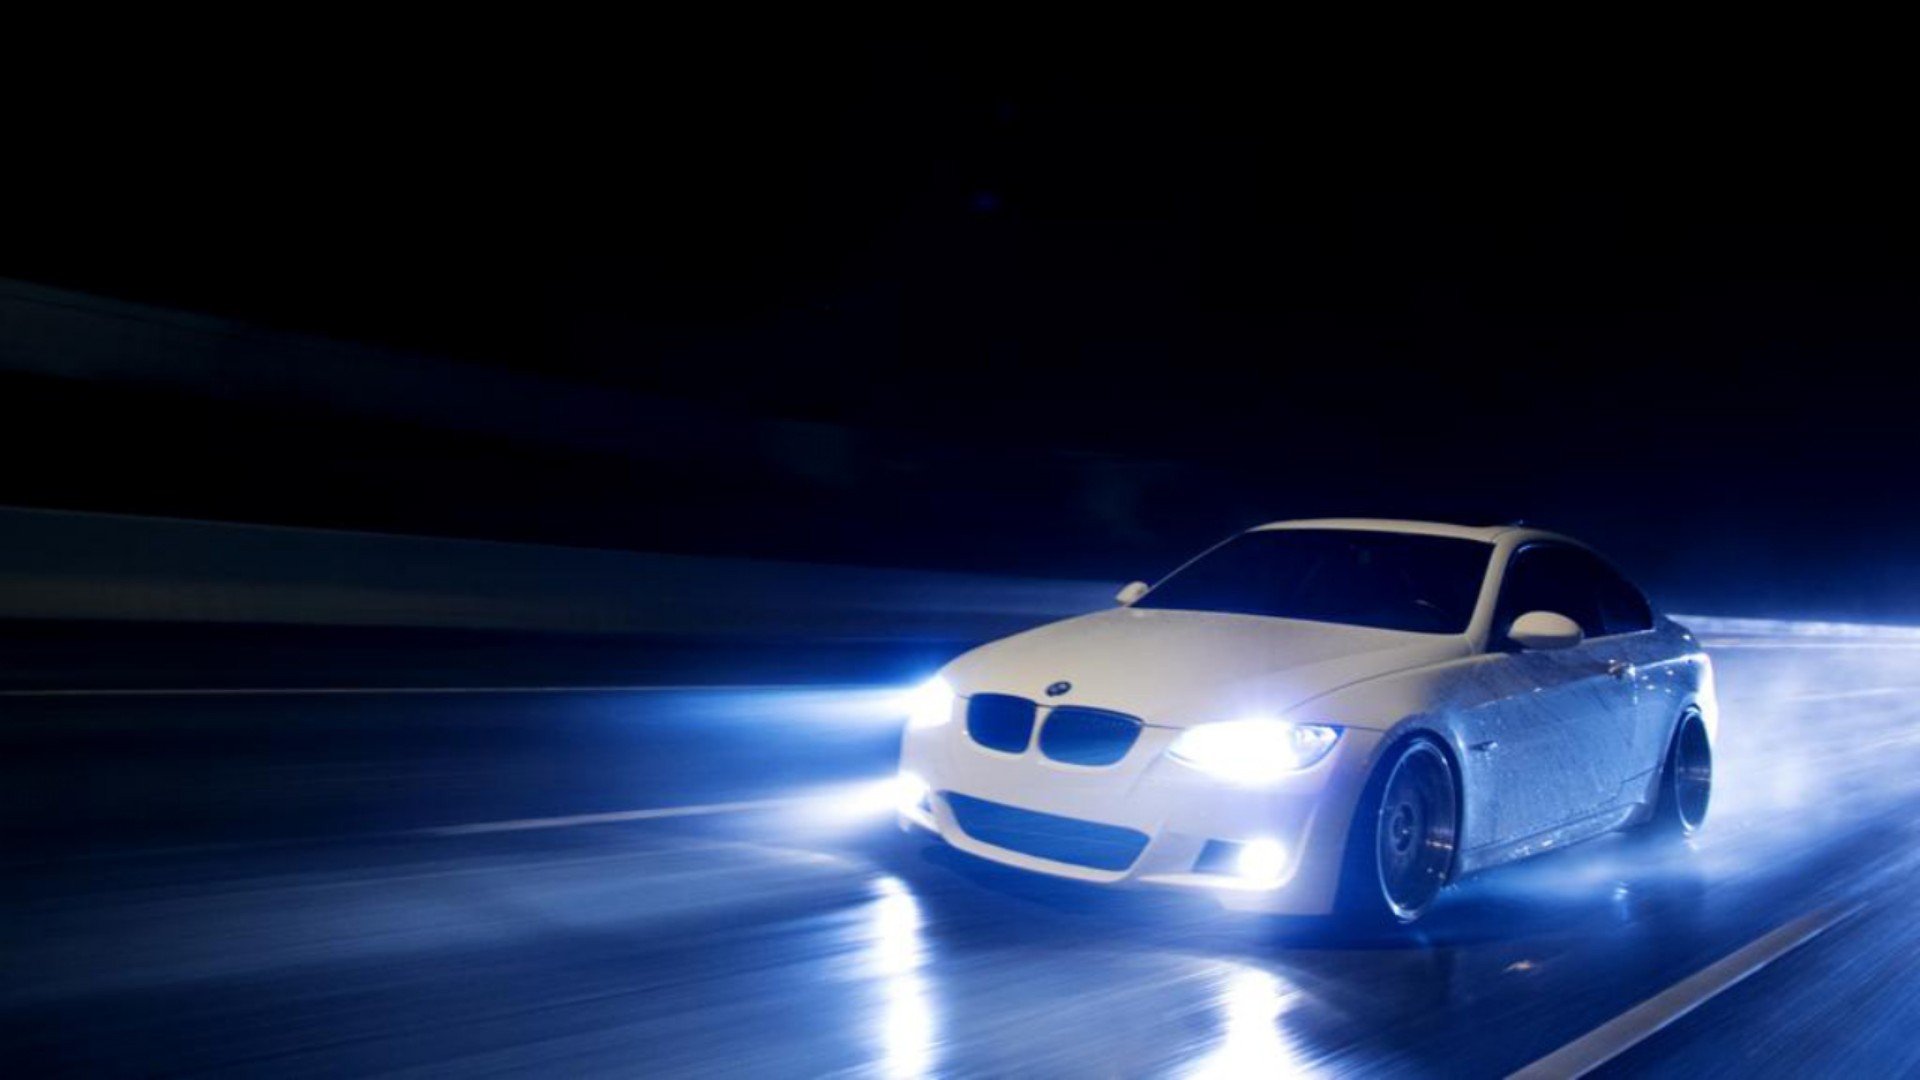 Bmw At Night Wallpapers